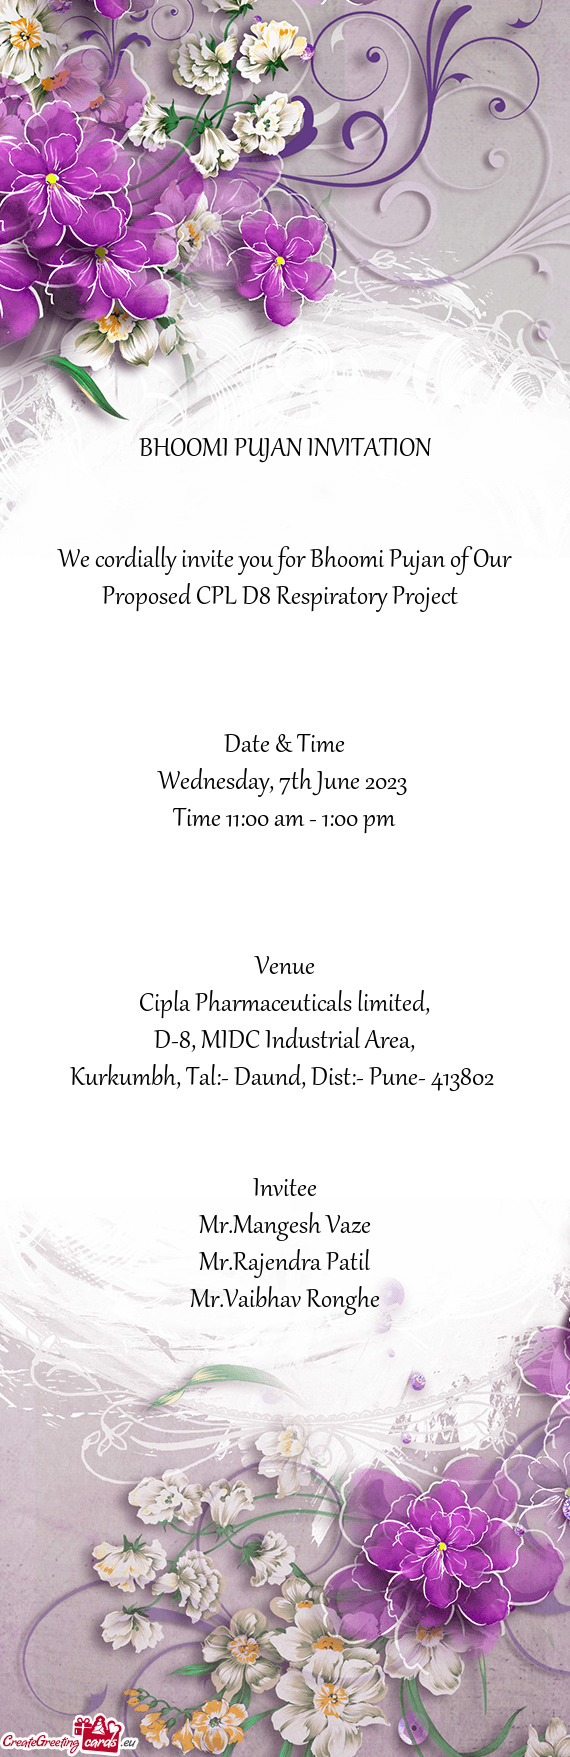 We cordially invite you for Bhoomi Pujan of Our Proposed CPL D8 Respiratory Project